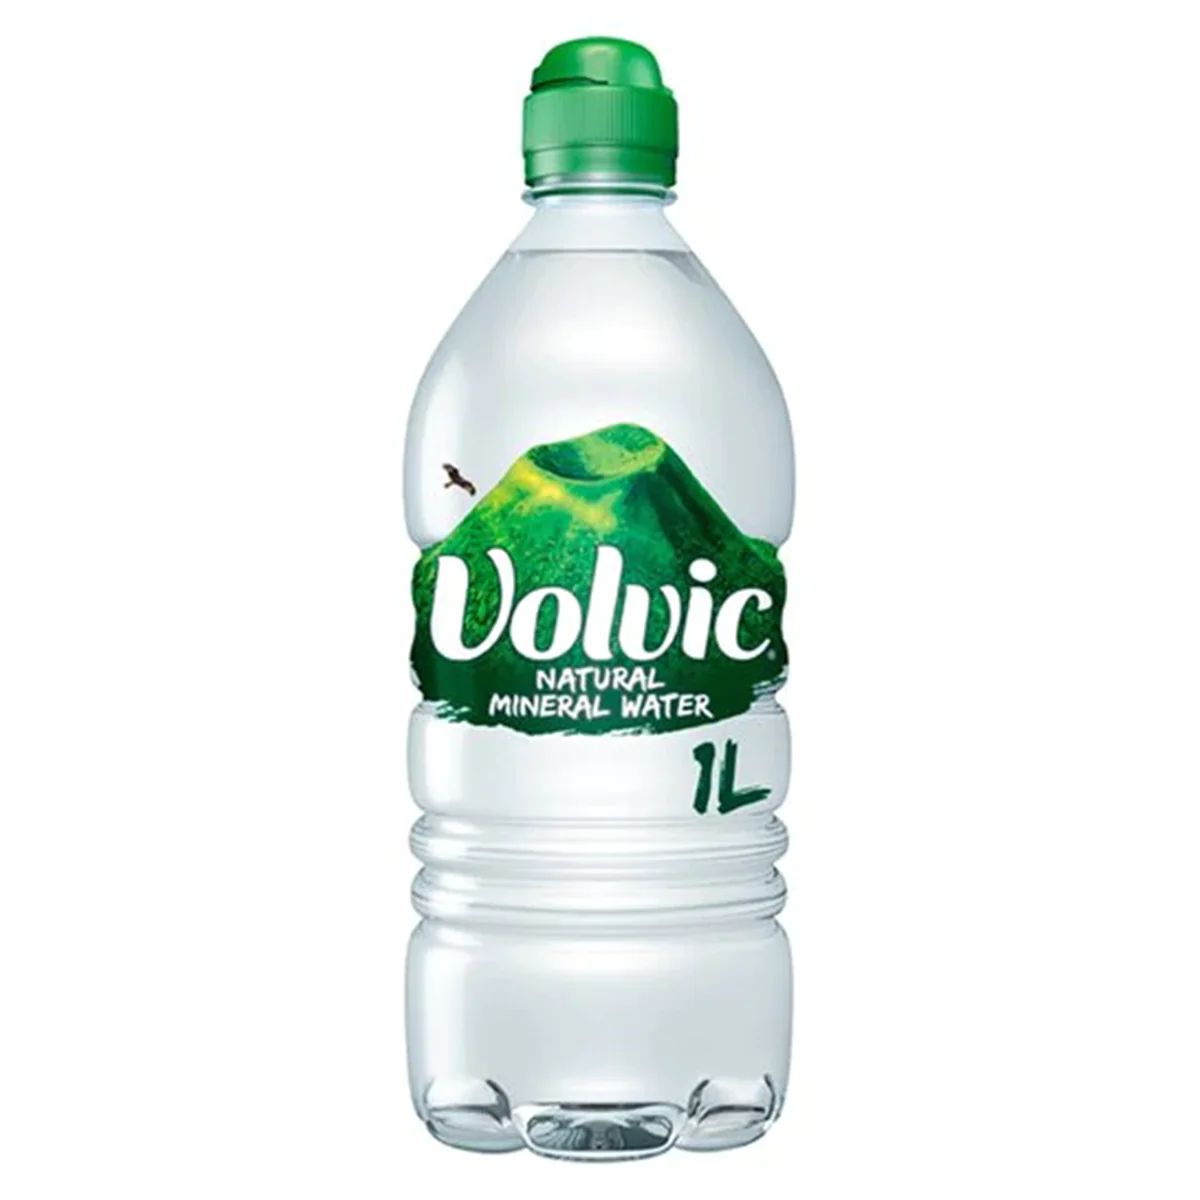 A 1-liter bottle of Volvic - Sports Cap Natural Mineral Water with a green cap.